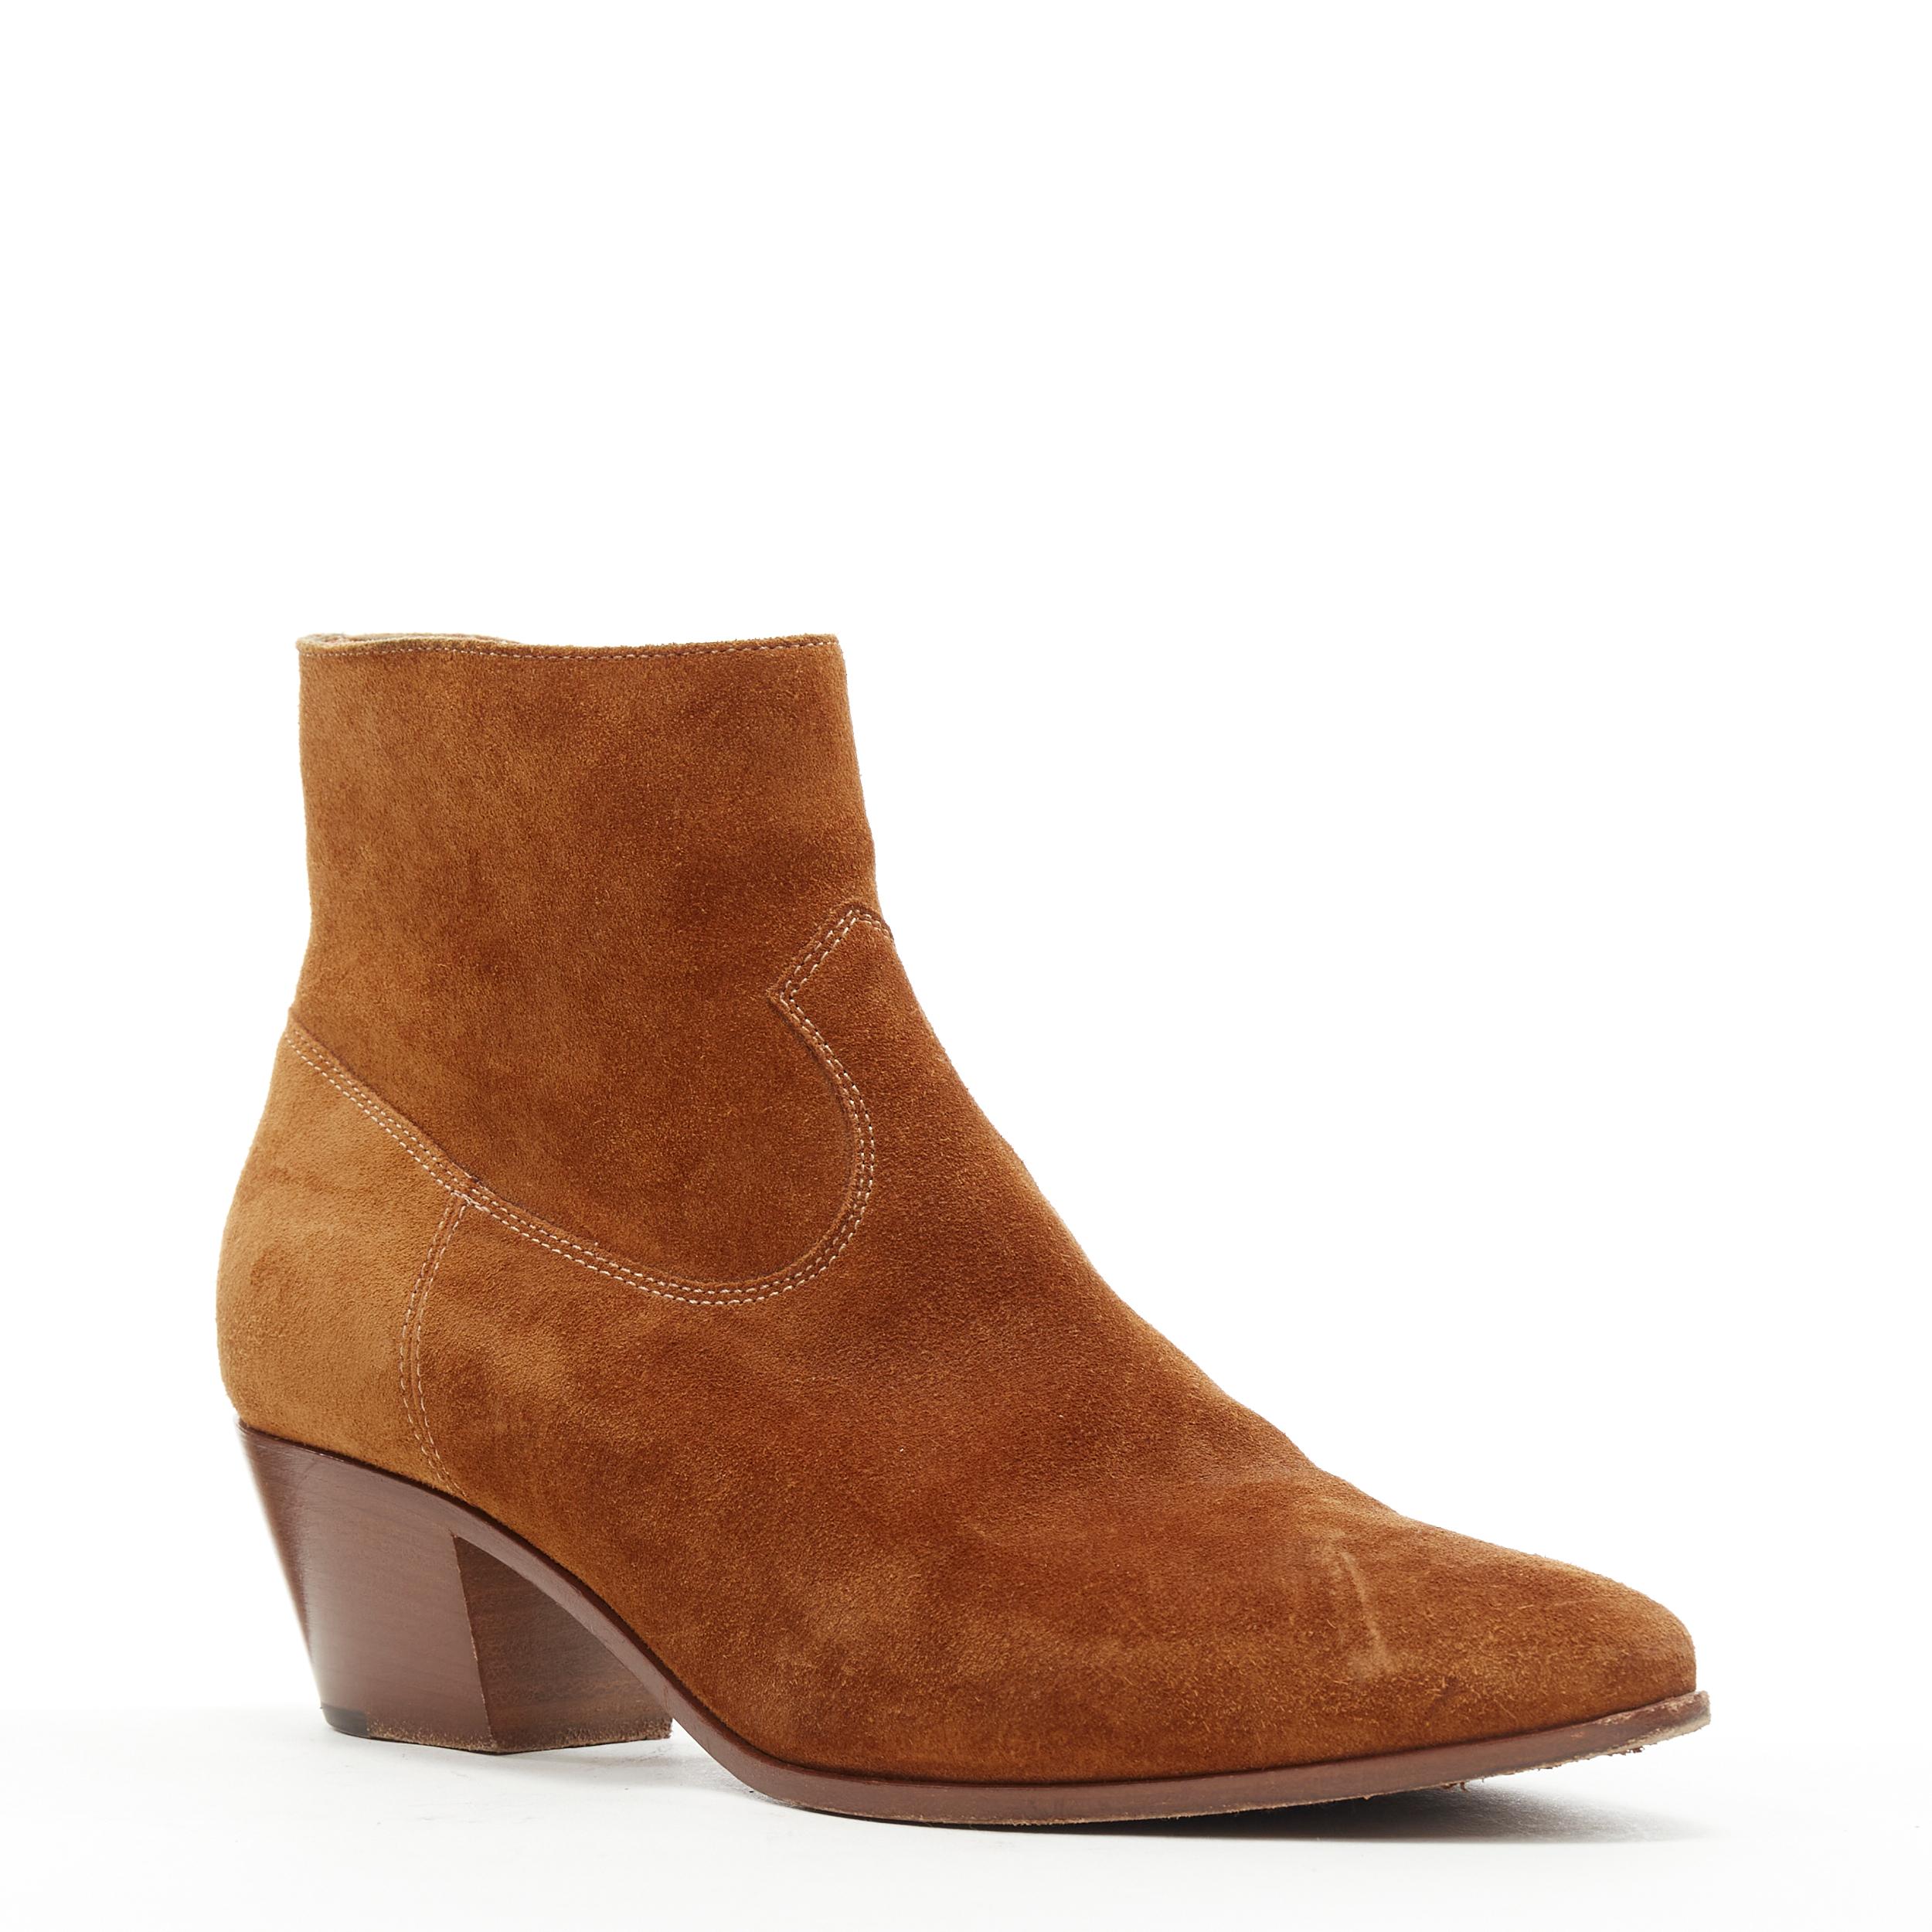 SAINT LAURENT Wyatt tan brown suede almond toe cuban bootie EU38 
Reference: LNKO/A01777 
Brand: Saint Laurent 
Material: Suede 
Color: Brown 
Pattern: Solid 
Closure: Zip 
Extra Detail: Almond point toe. Wooden cuban heel. 
Made in: Italy